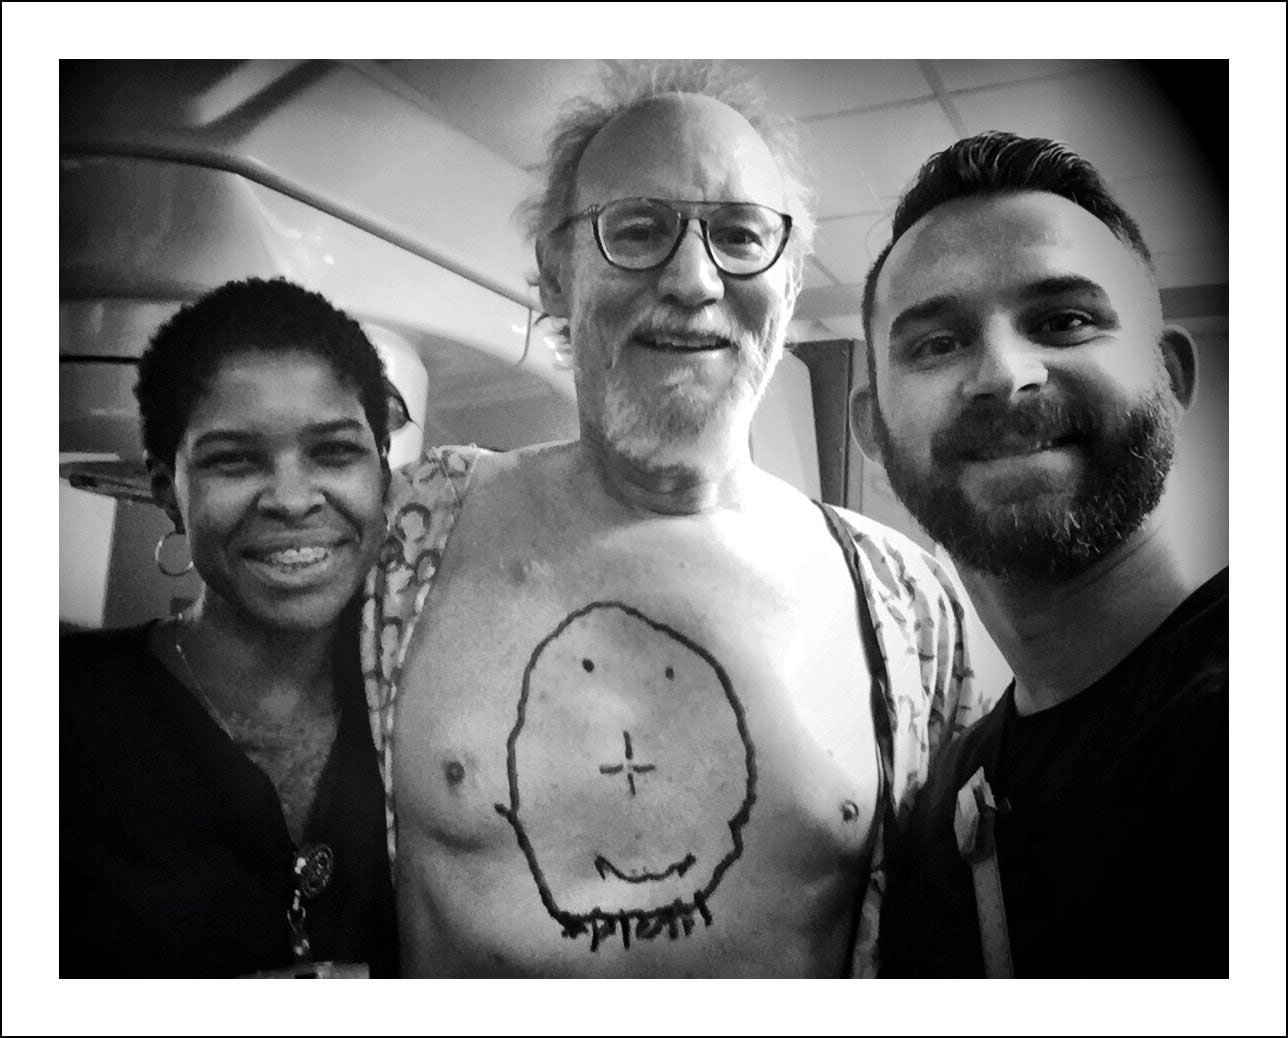 1/26/18 — Last of 15 radiology appointments today. I surprised Ramona and Rob, the super zapping duo, with a big smile. Courtney Perry suggested I draw a smiley face when she saw a previous post showing the alignment tattoos. The little dot in the center of the nose is permanent. The rest I did this morning. I know it's pretty bad because my great artist son wouldn't do it for me.